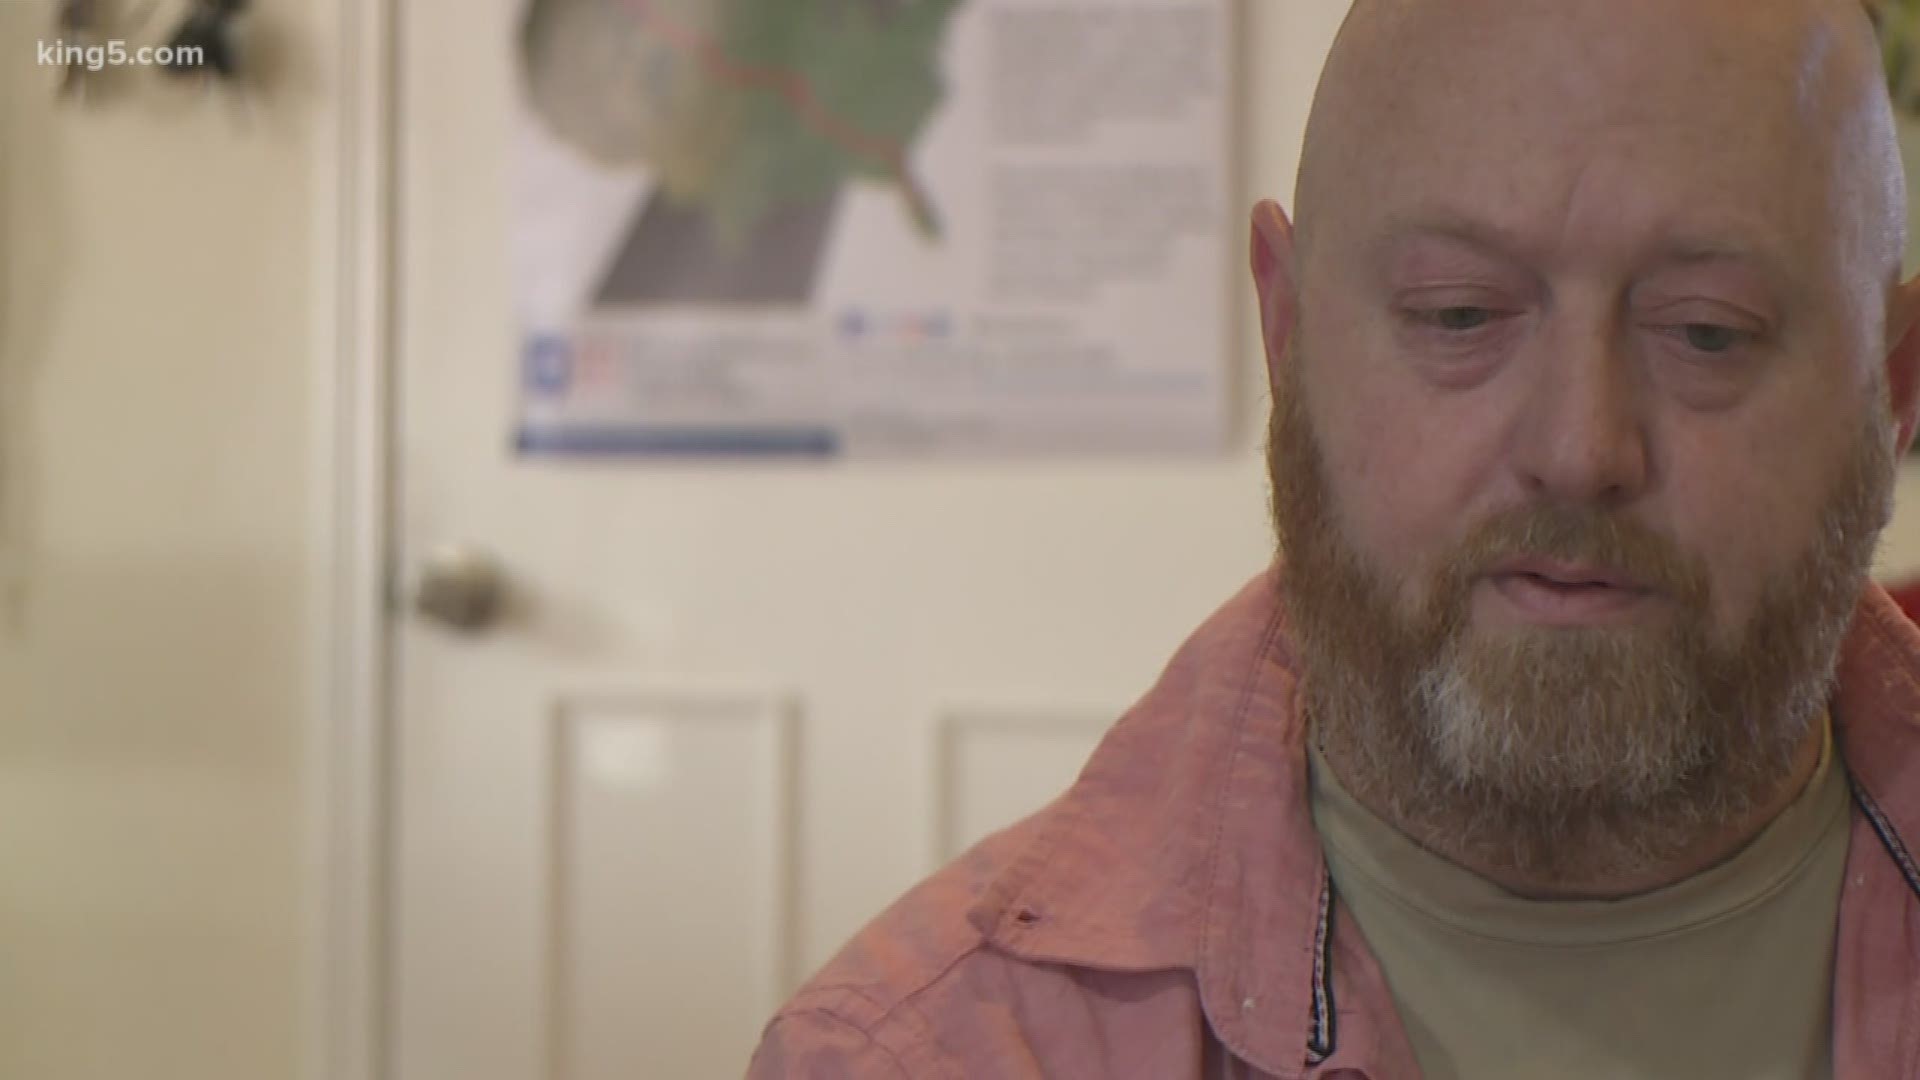 22. That's the number of veterans the VA says die by suicide every day. KING 5's Vanessa Misciagna met Jimmy Novak, a local veteran embarking on a journey to help bring that number down.